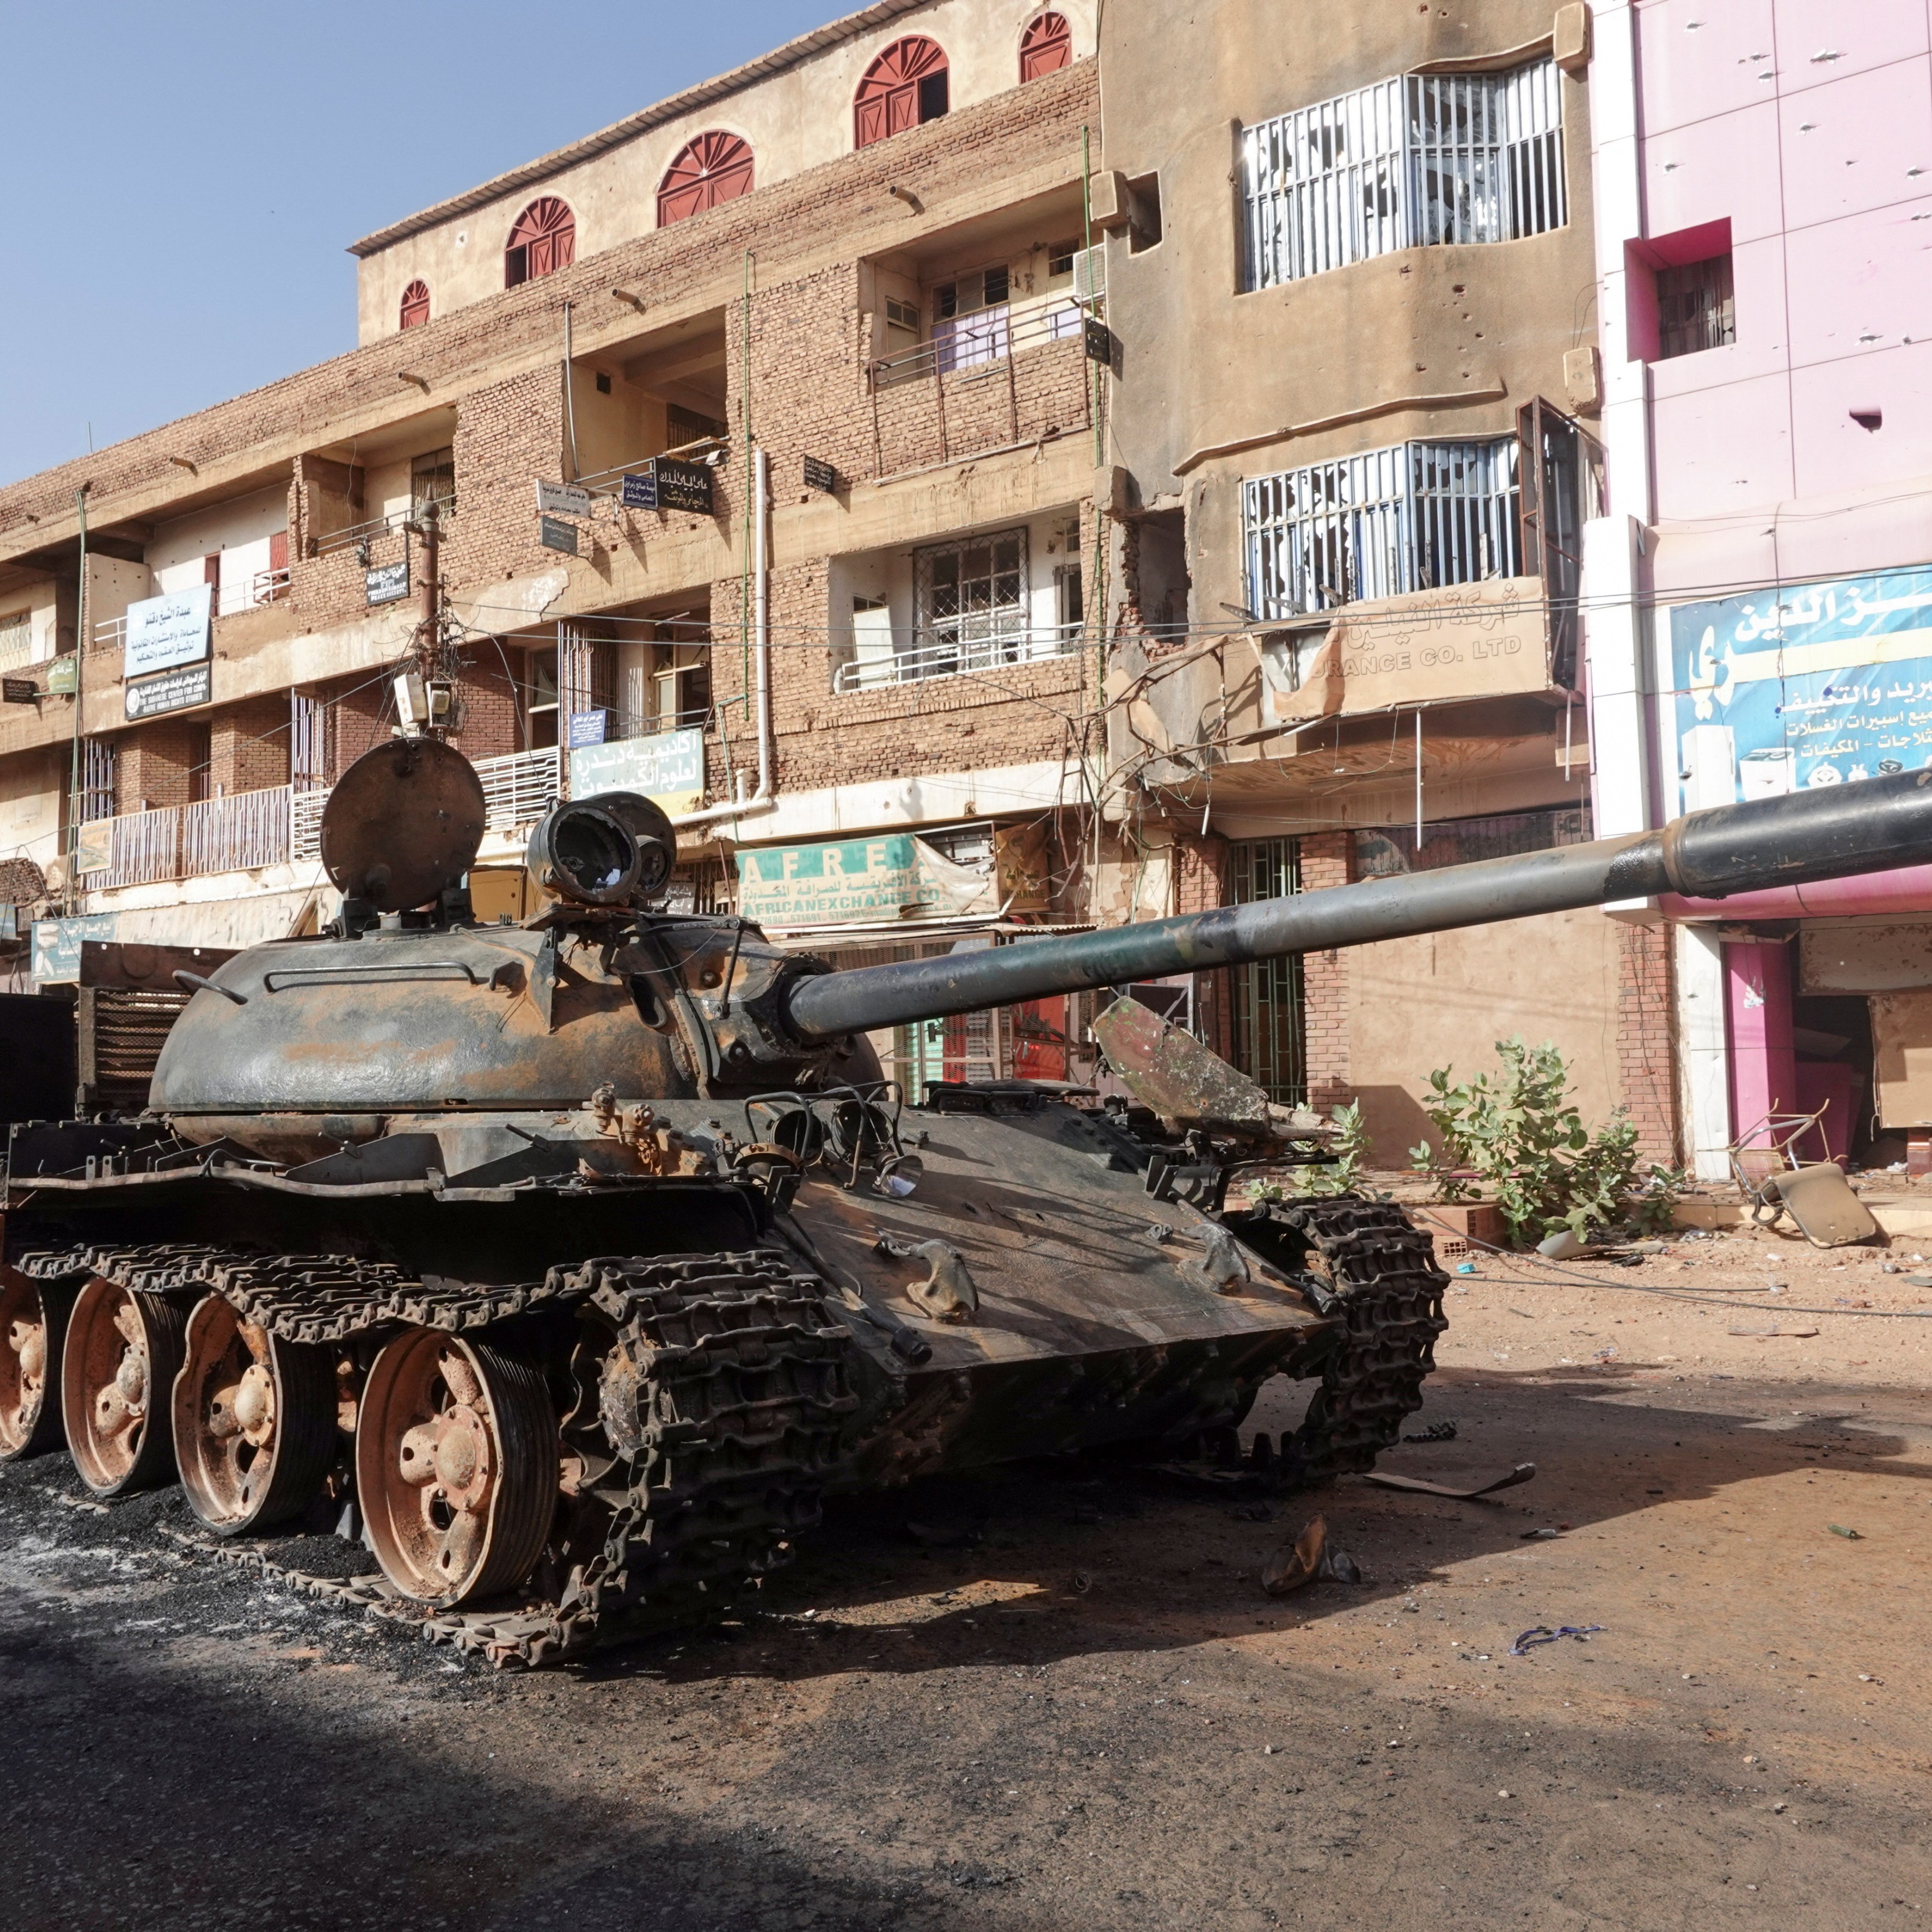 A damaged army tank in Omdurman, Sudan. One year since the conflict started, the military has ordered people to bury the dead in their yards and not to go to the cemeteries